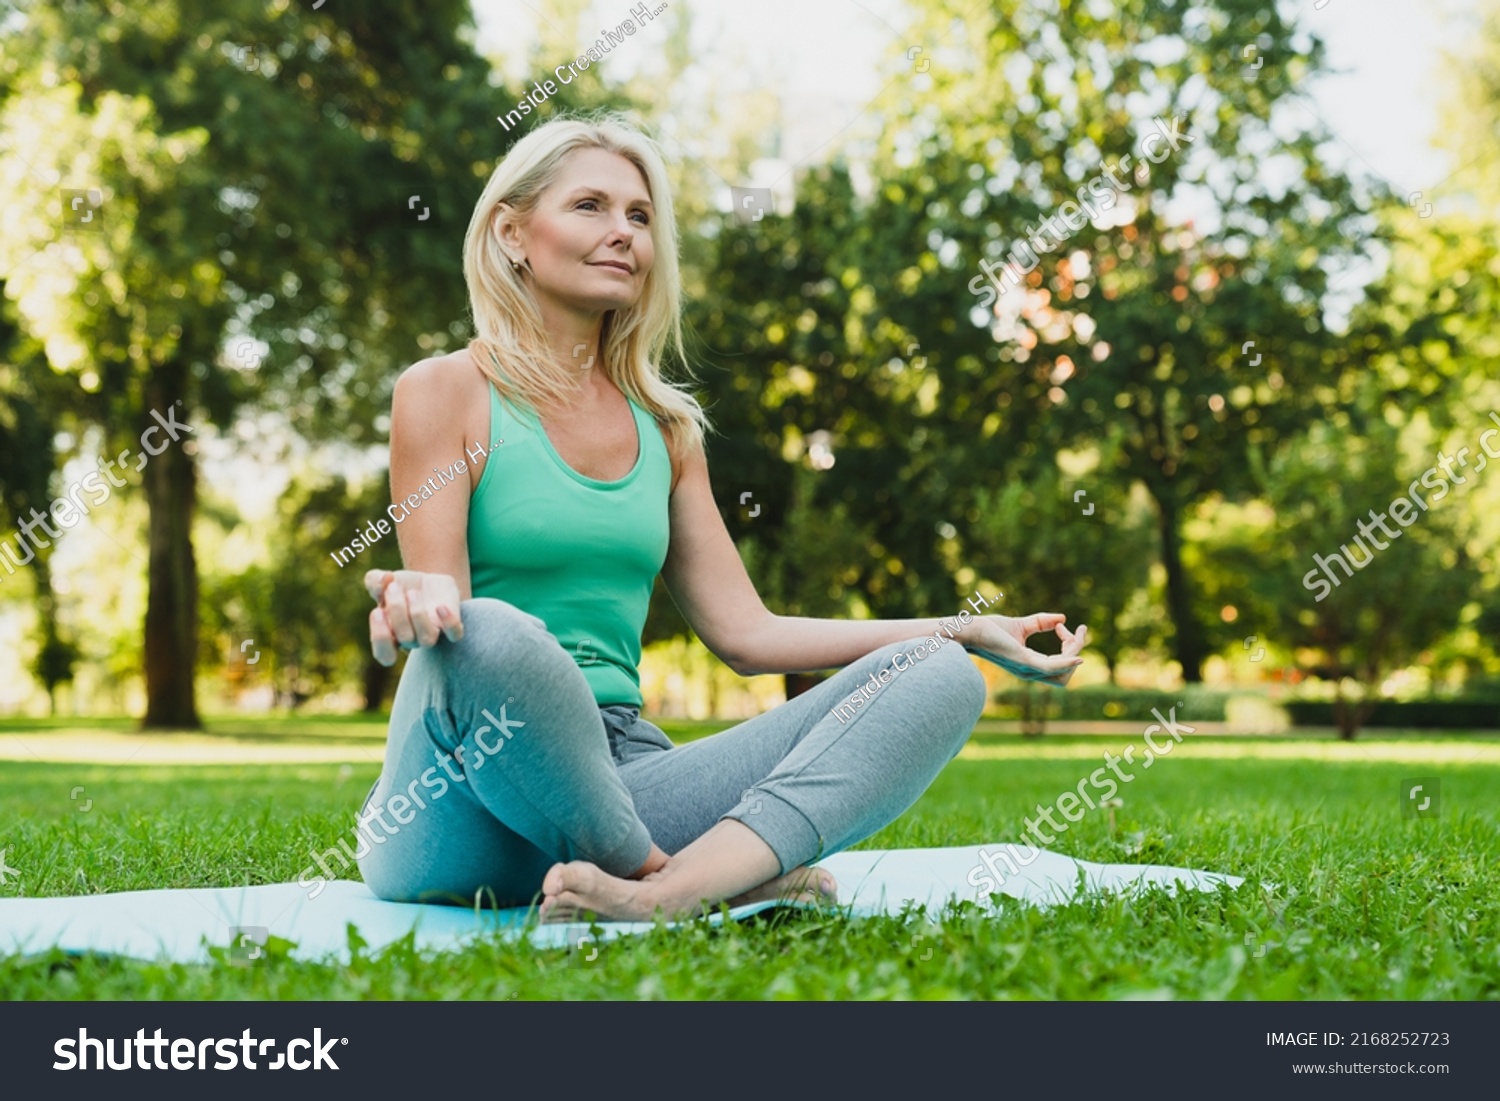 Close up portrait of caucasian mature woman in sporty outfit relaxing meditating feeling zen-like on fitness mat in public park outdoors. Healthy active lifestyle #2168252723